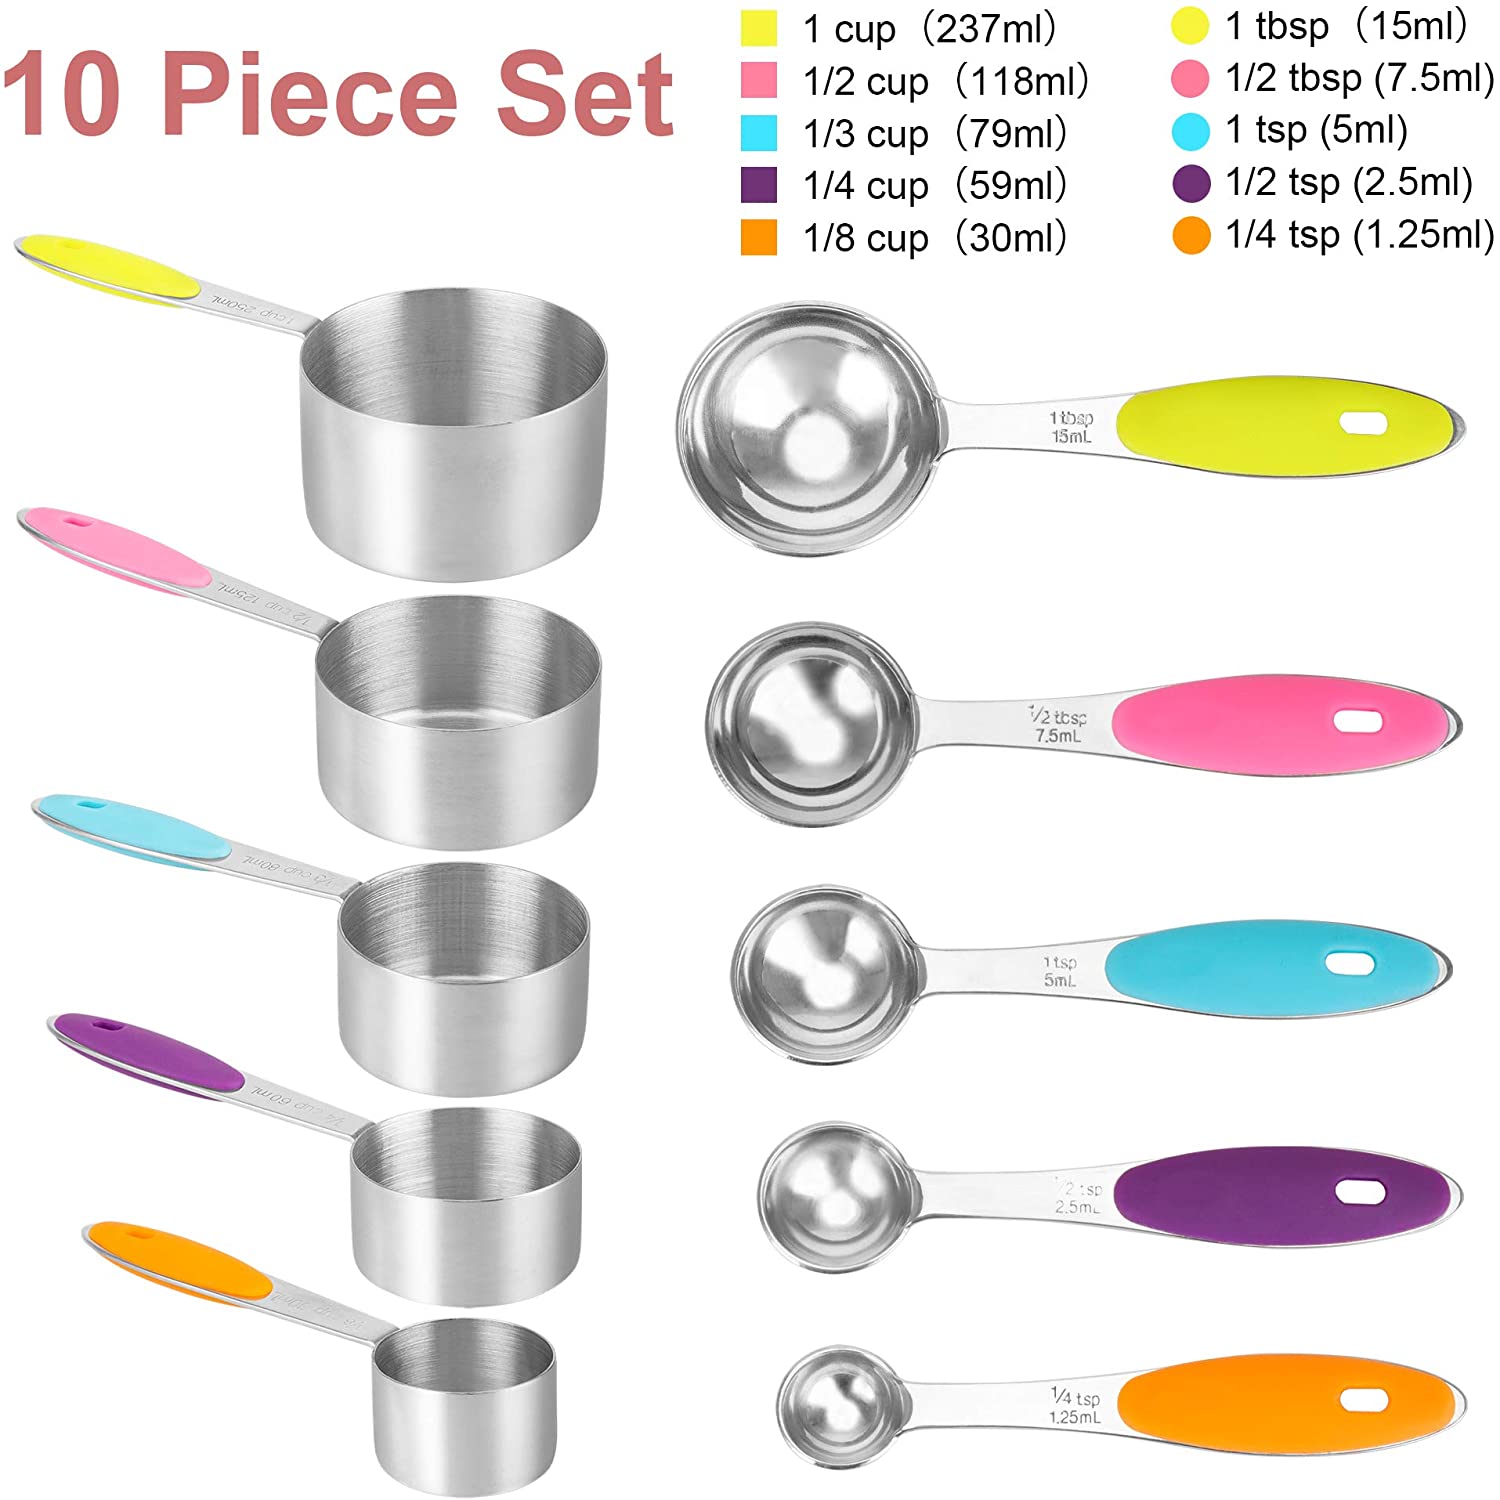 Measuring Cups and Spoons Set ,10 Piece Stainless Steel Measuring Spoons and Cups with Soft Silicone Handles and Clearly Scale - image 2 of 7